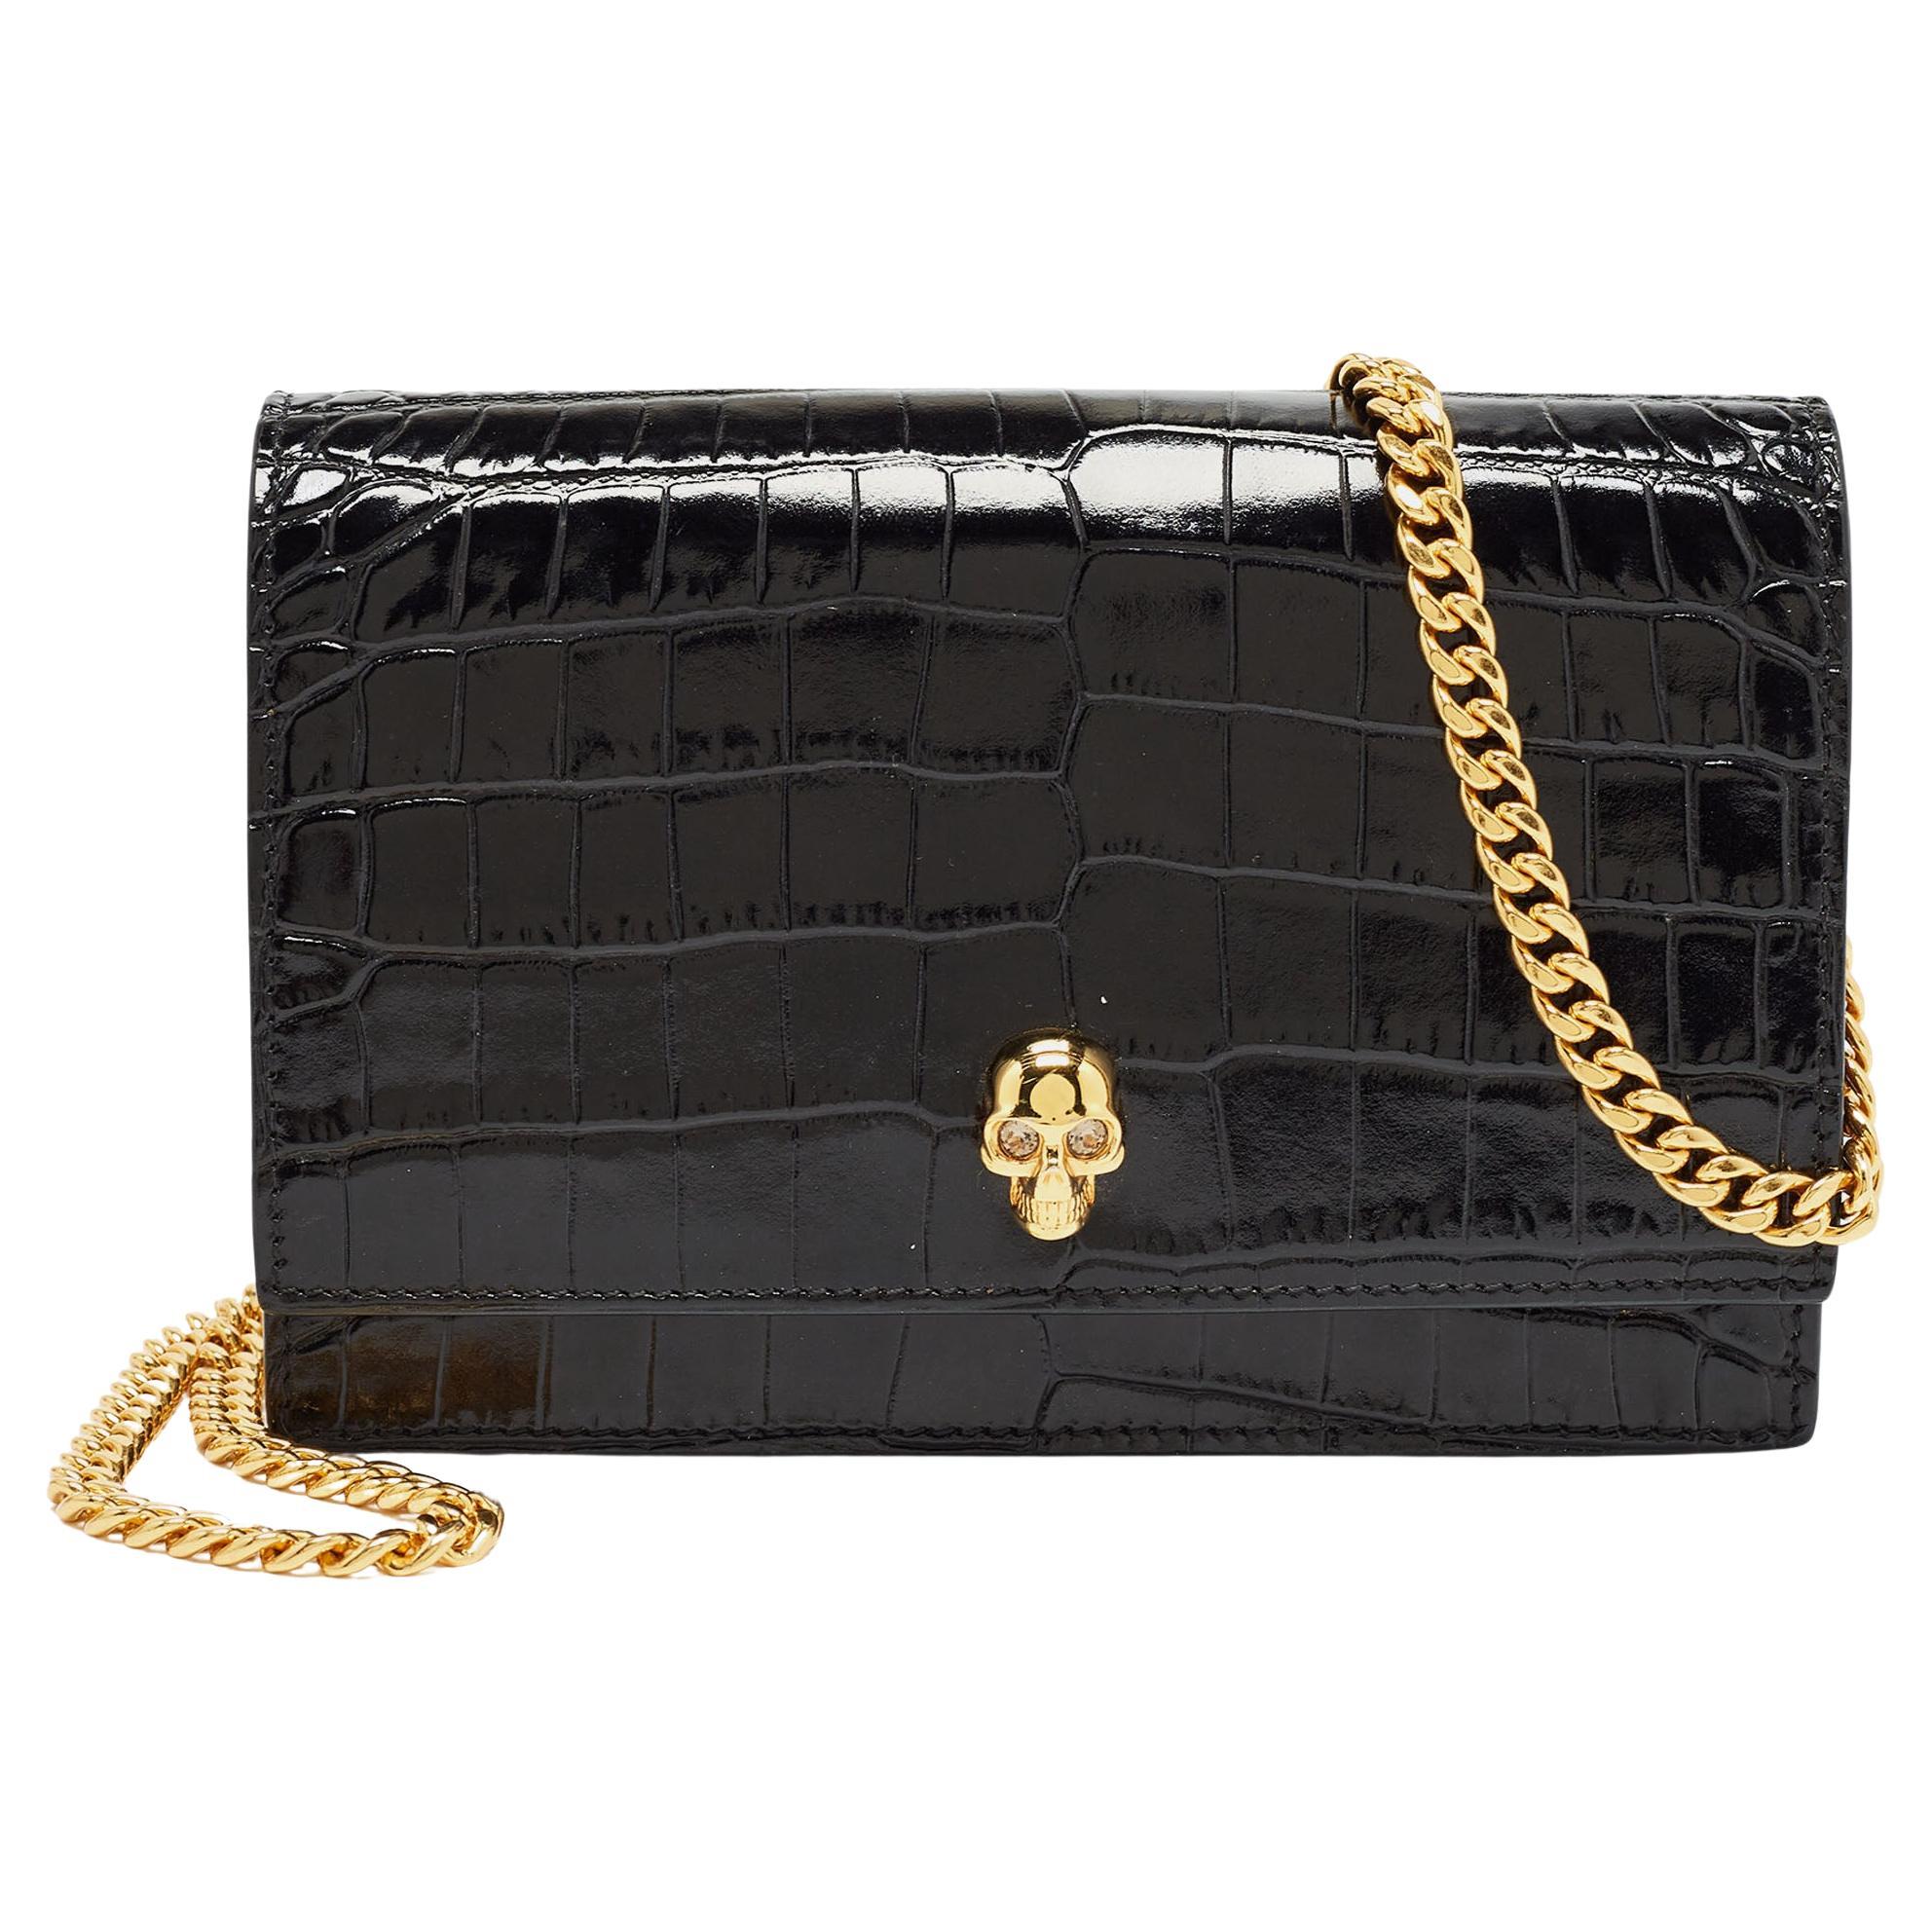 Alexander McQueen Black Croc Embossed Leather Skull Chain Clutch For Sale